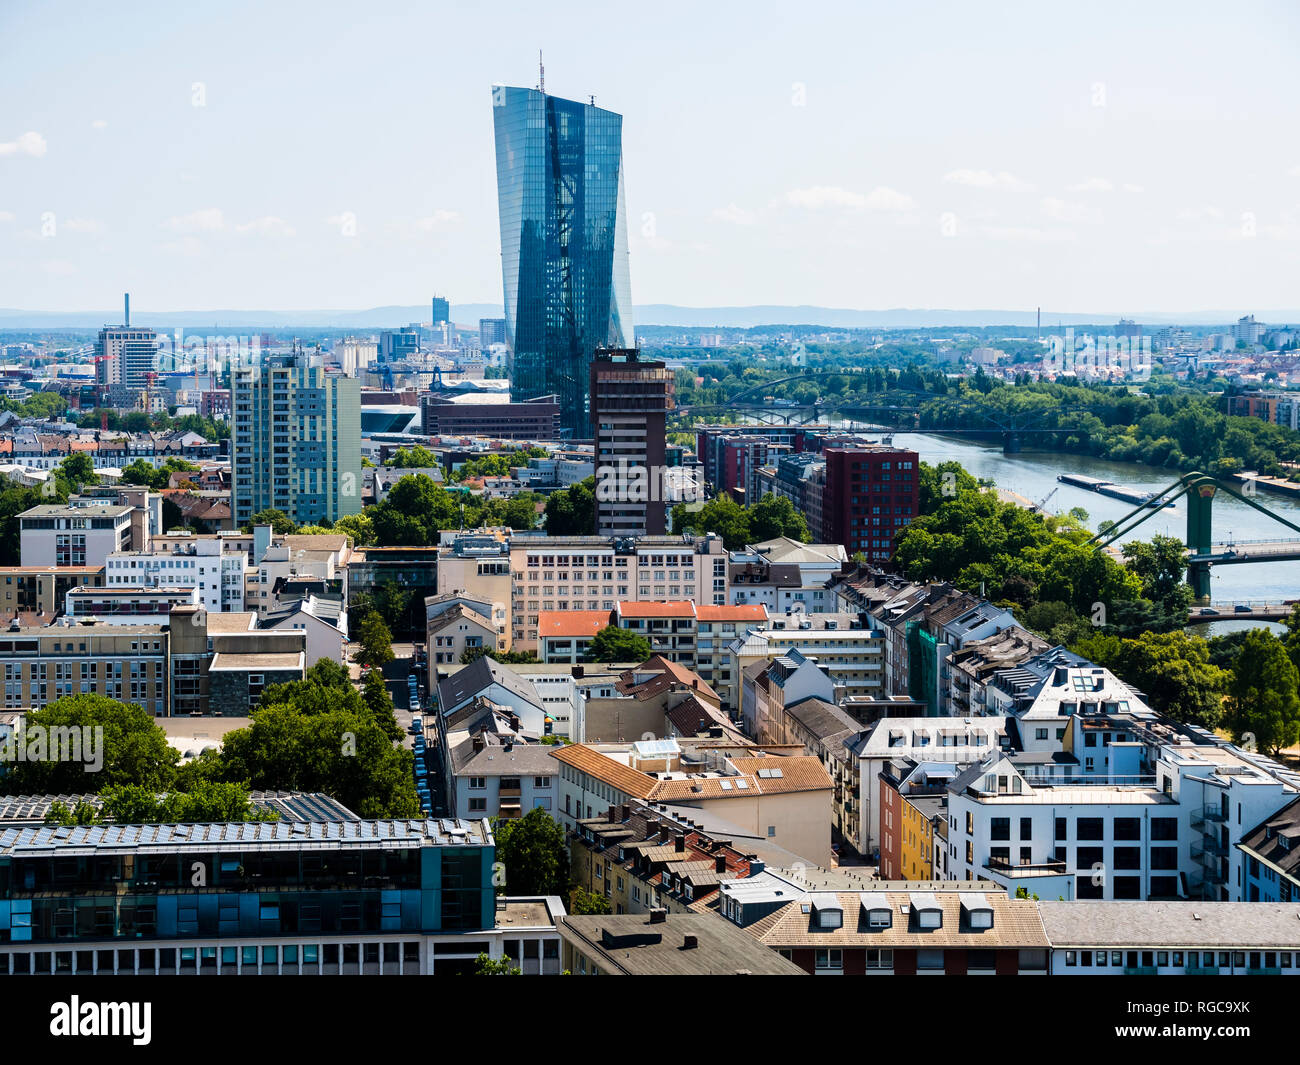 Germany, Hesse, Frankfurt, view to European Central Bank Stock Photo